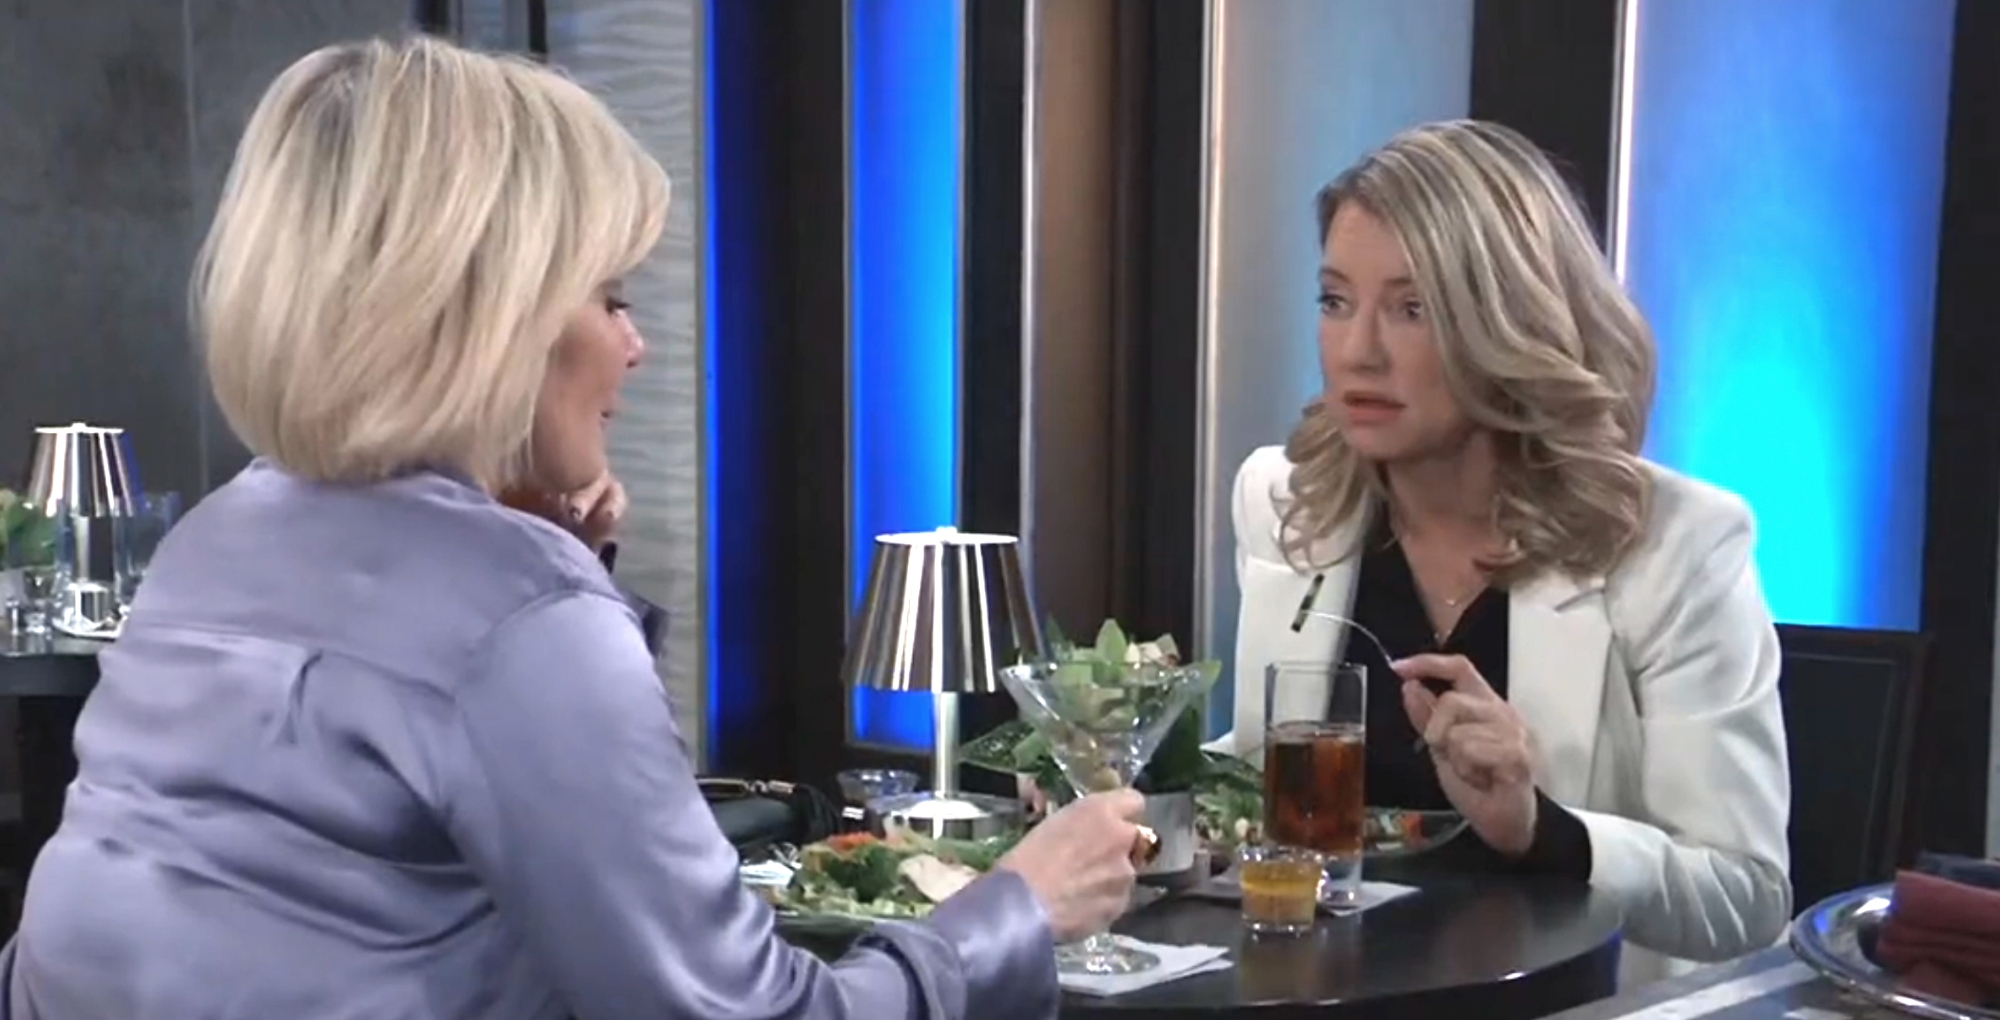 general hospital recap for march 10, 2023, has nina reeves and ava deduce things